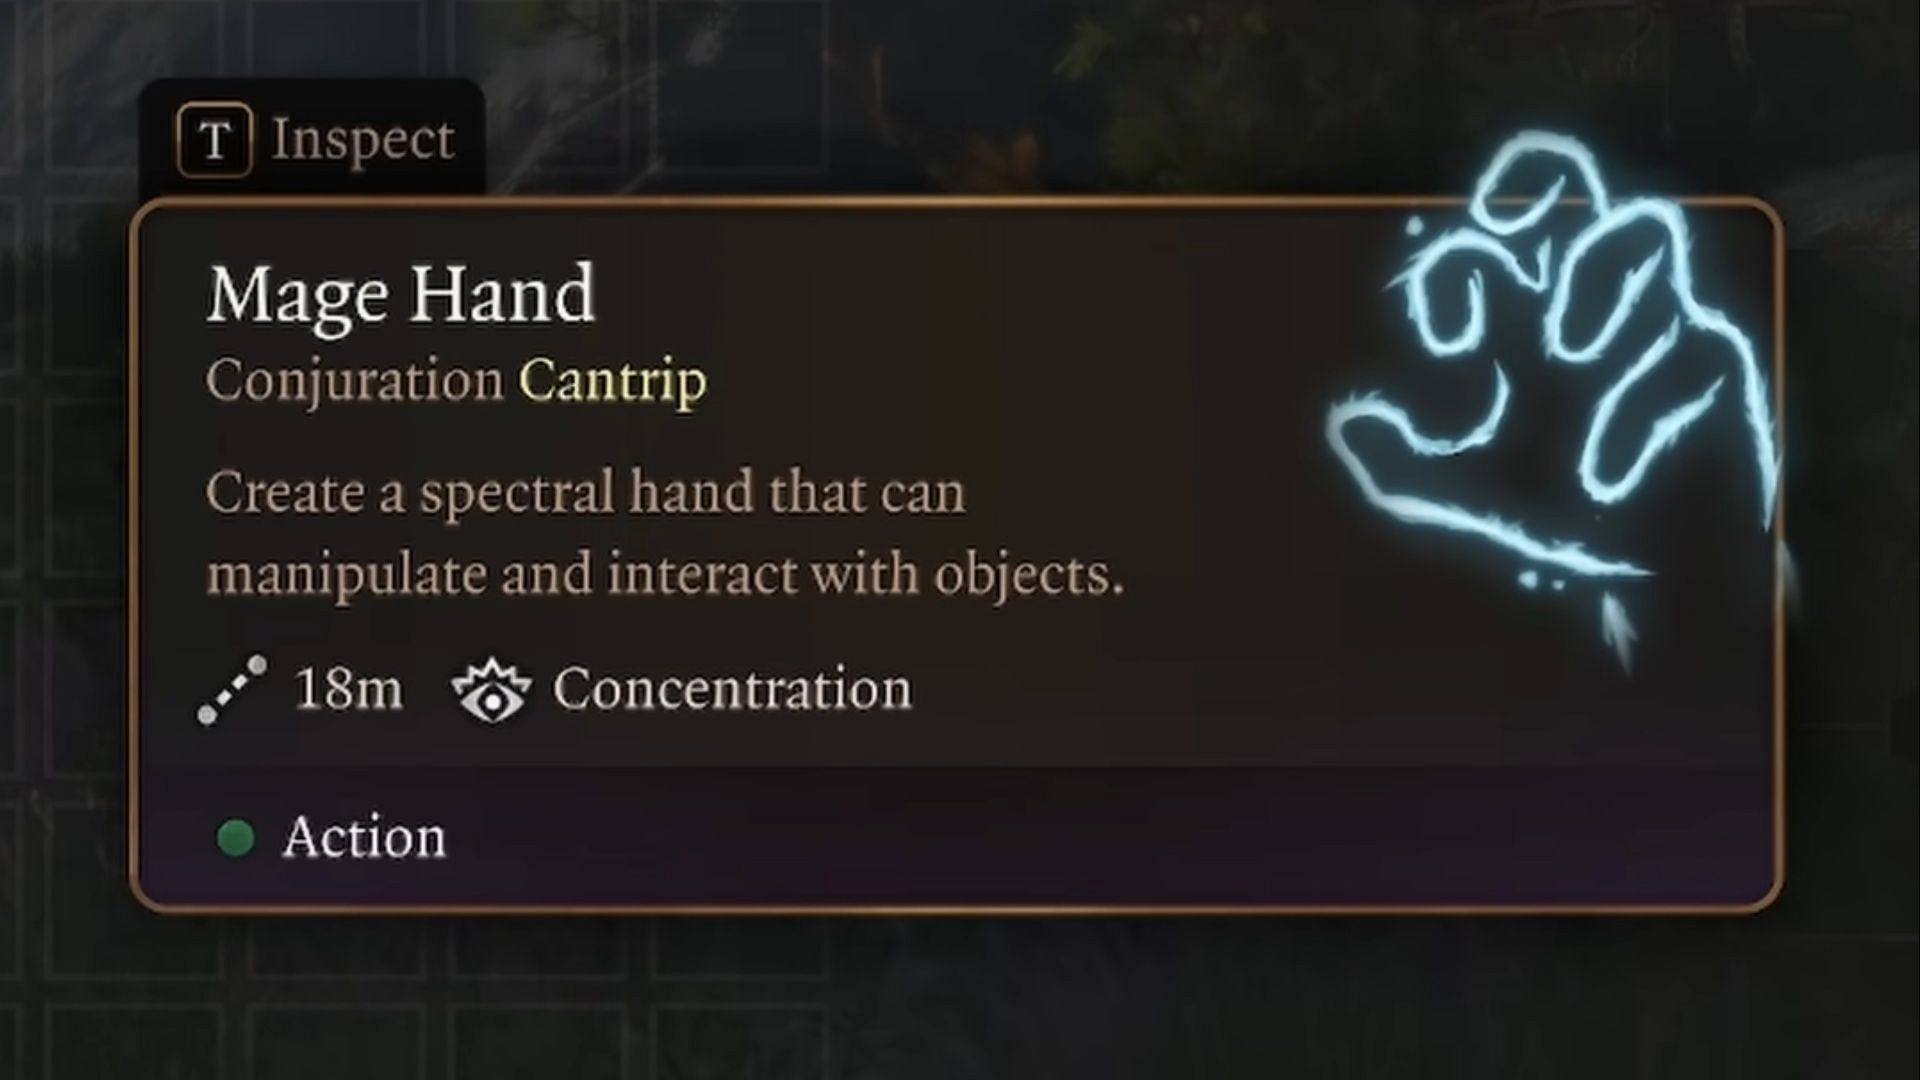 Mage Hand helps locate traps in suspicious areas of the game (Image via Larian Studios)